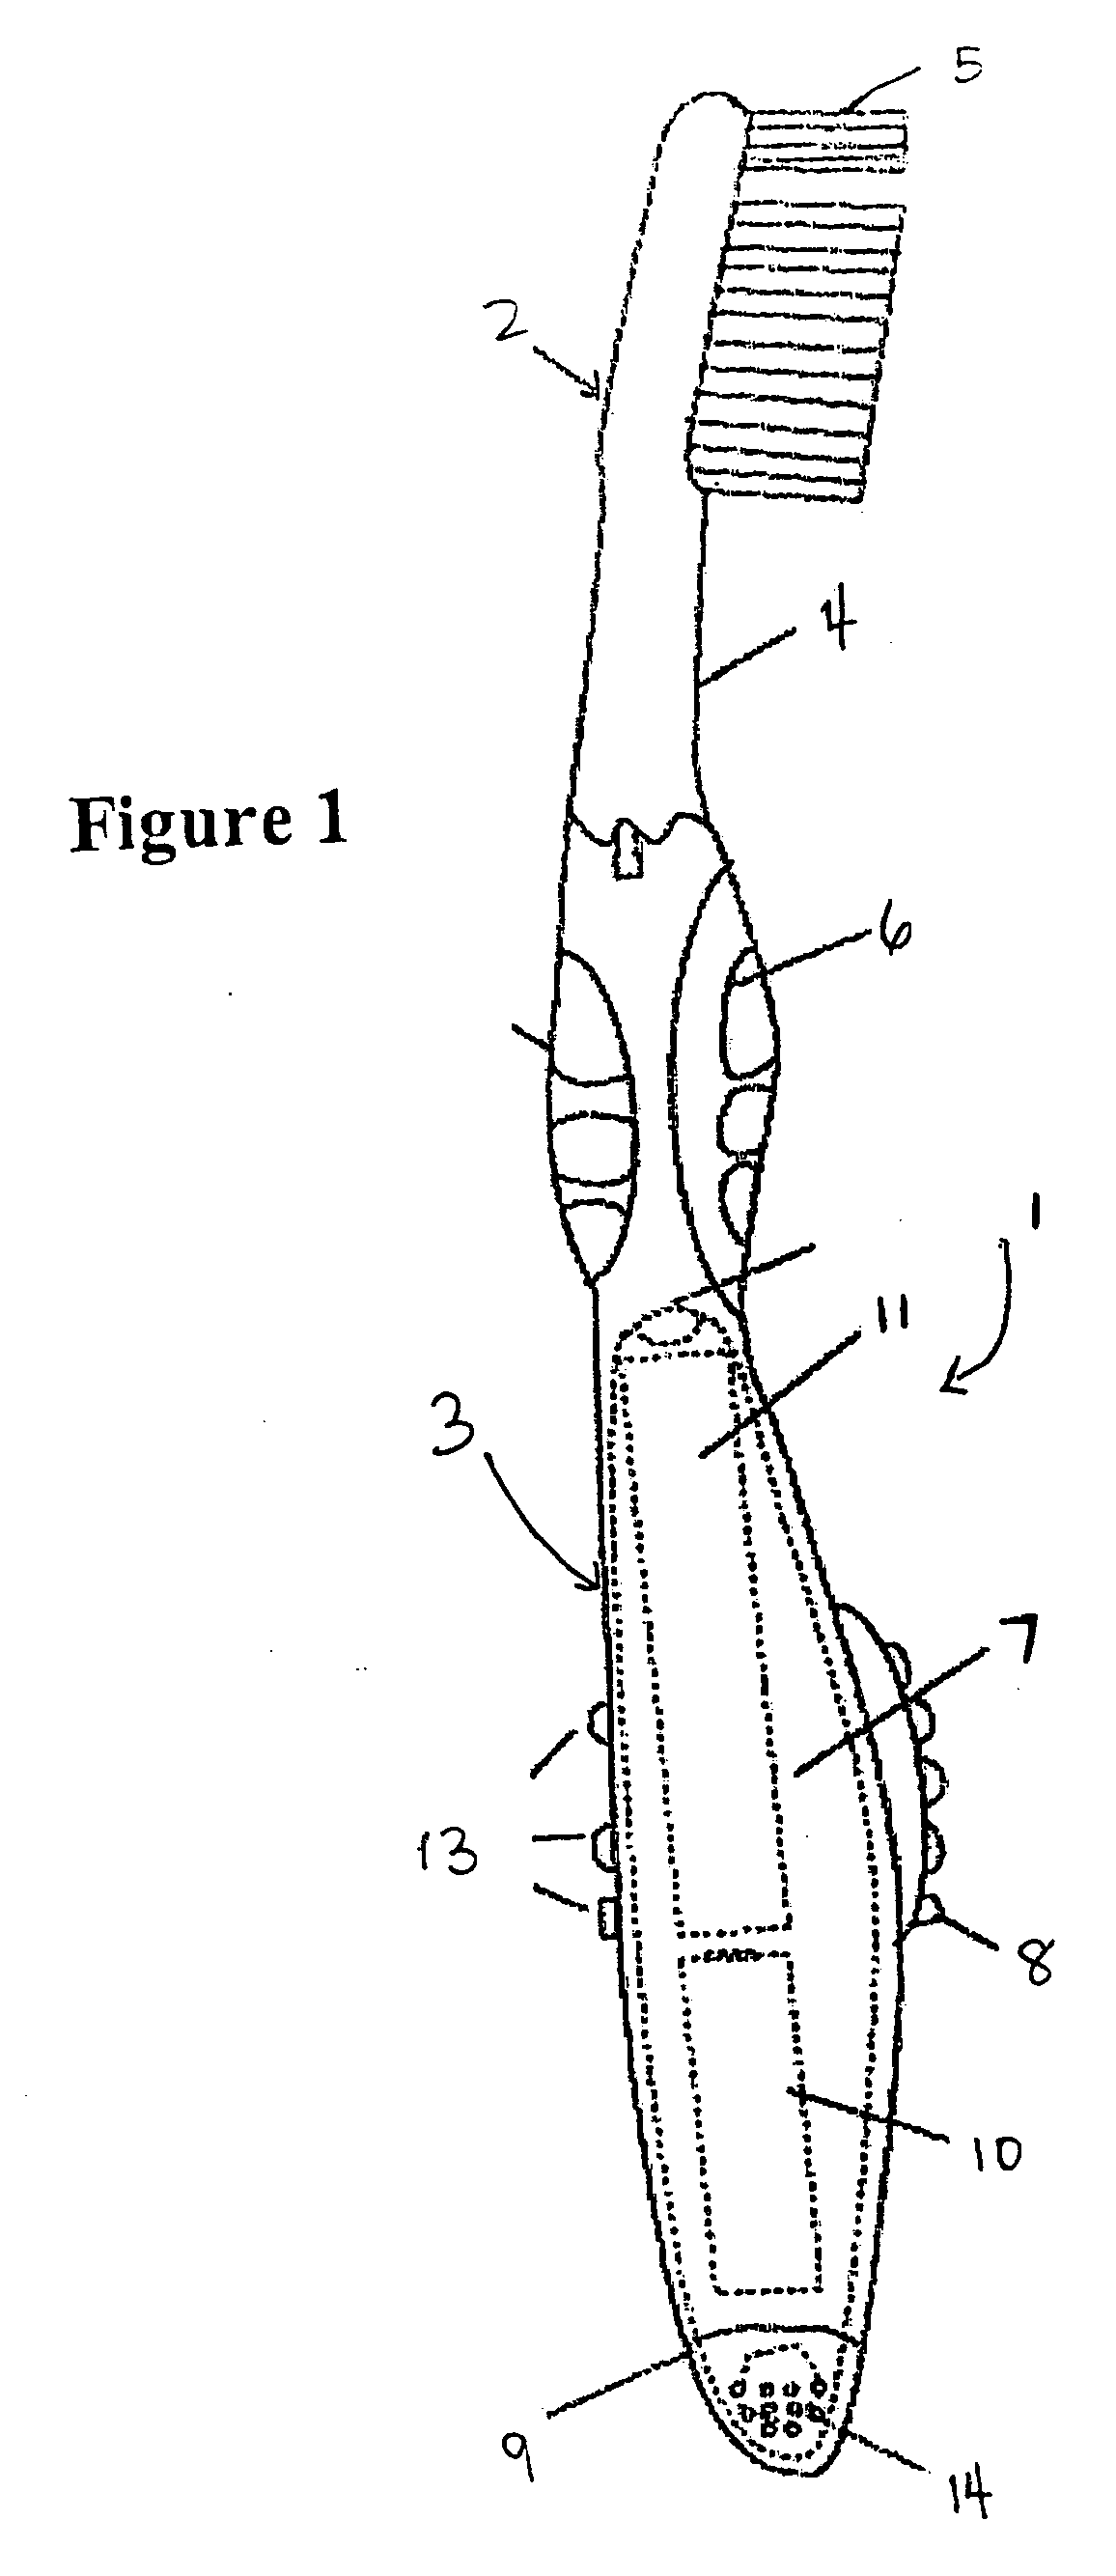 Oral care device capable of producing and recording sound